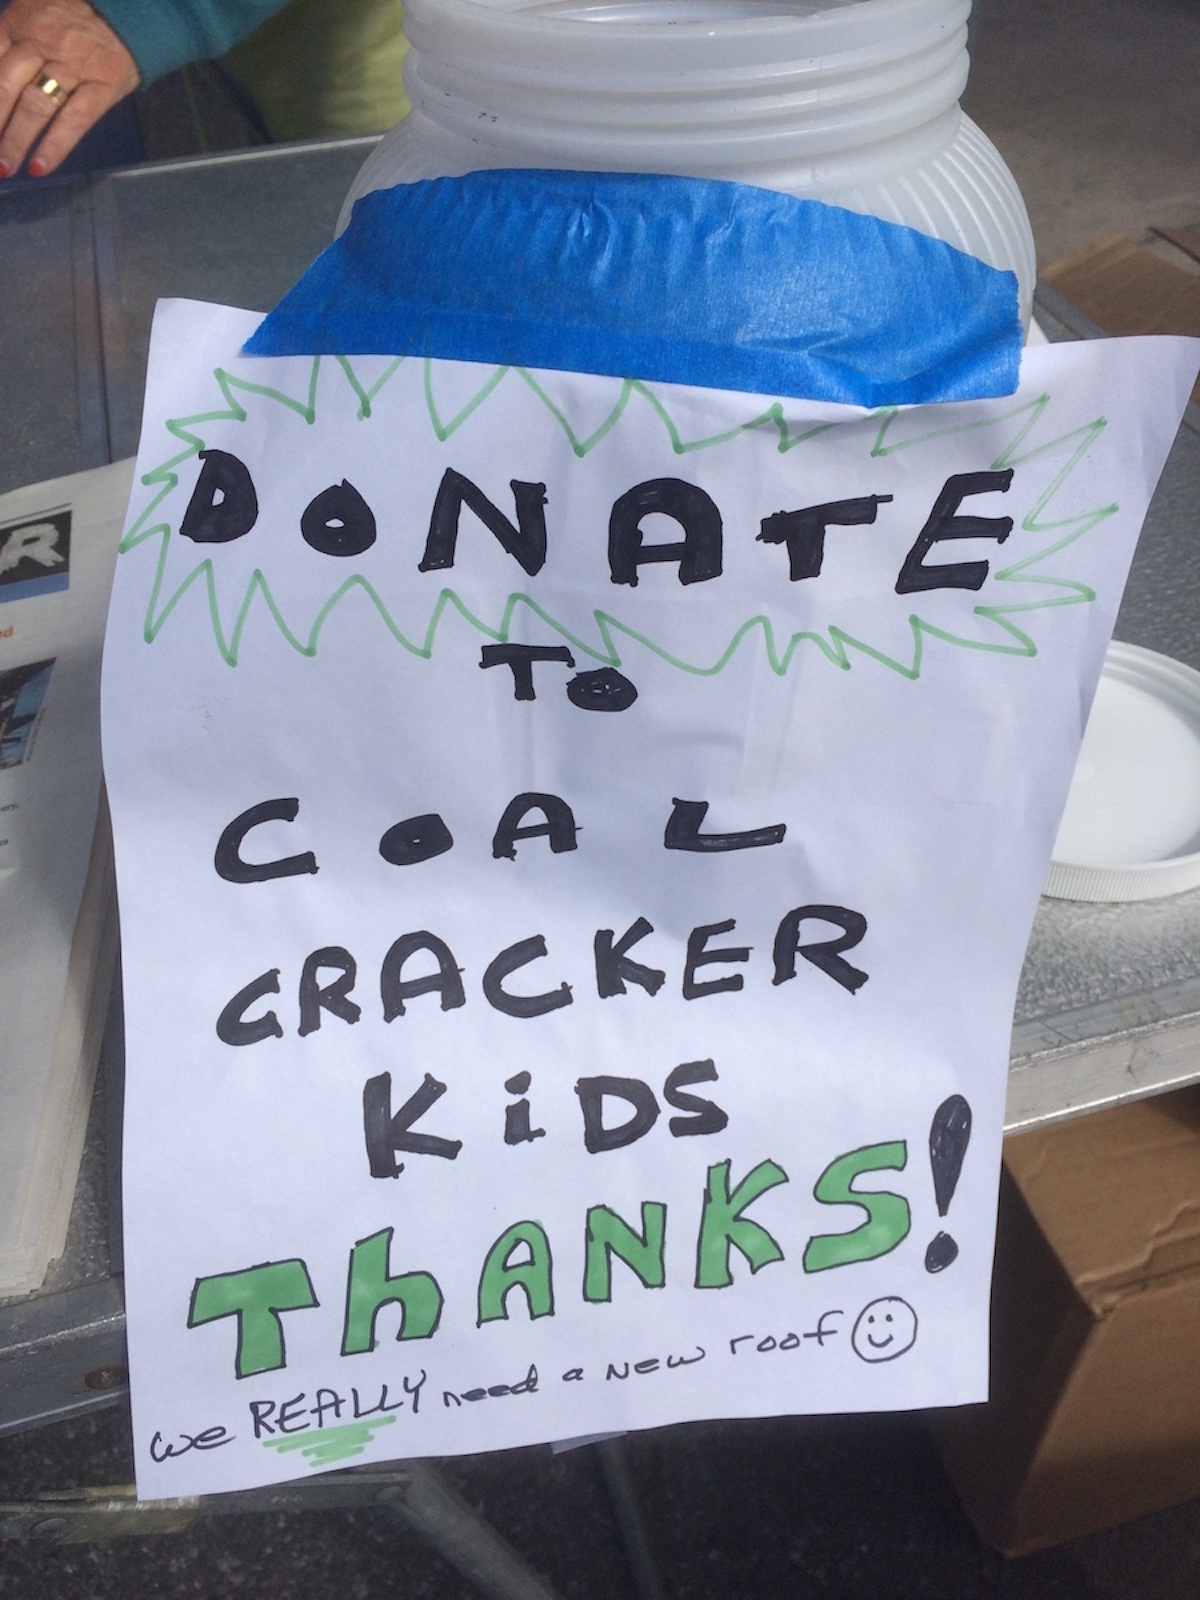 Photo of a donation jar for Coal Cracker Kids.